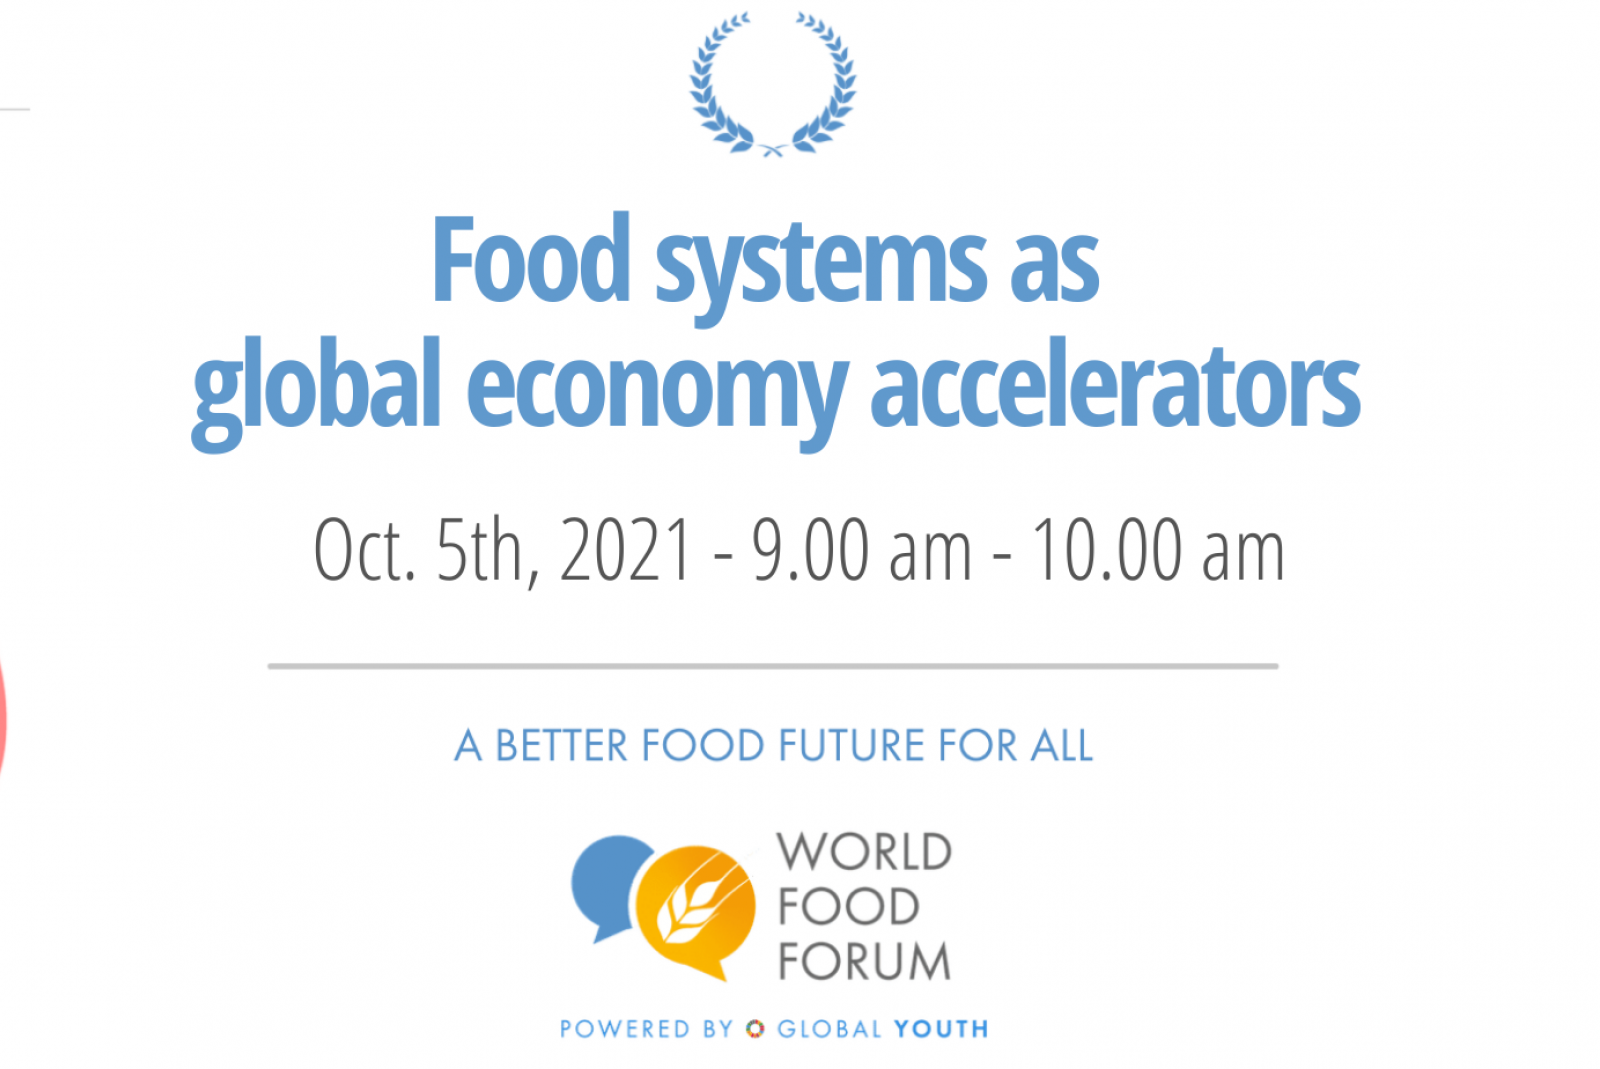 Food systems as global economy accelerators - October 5th, 2021